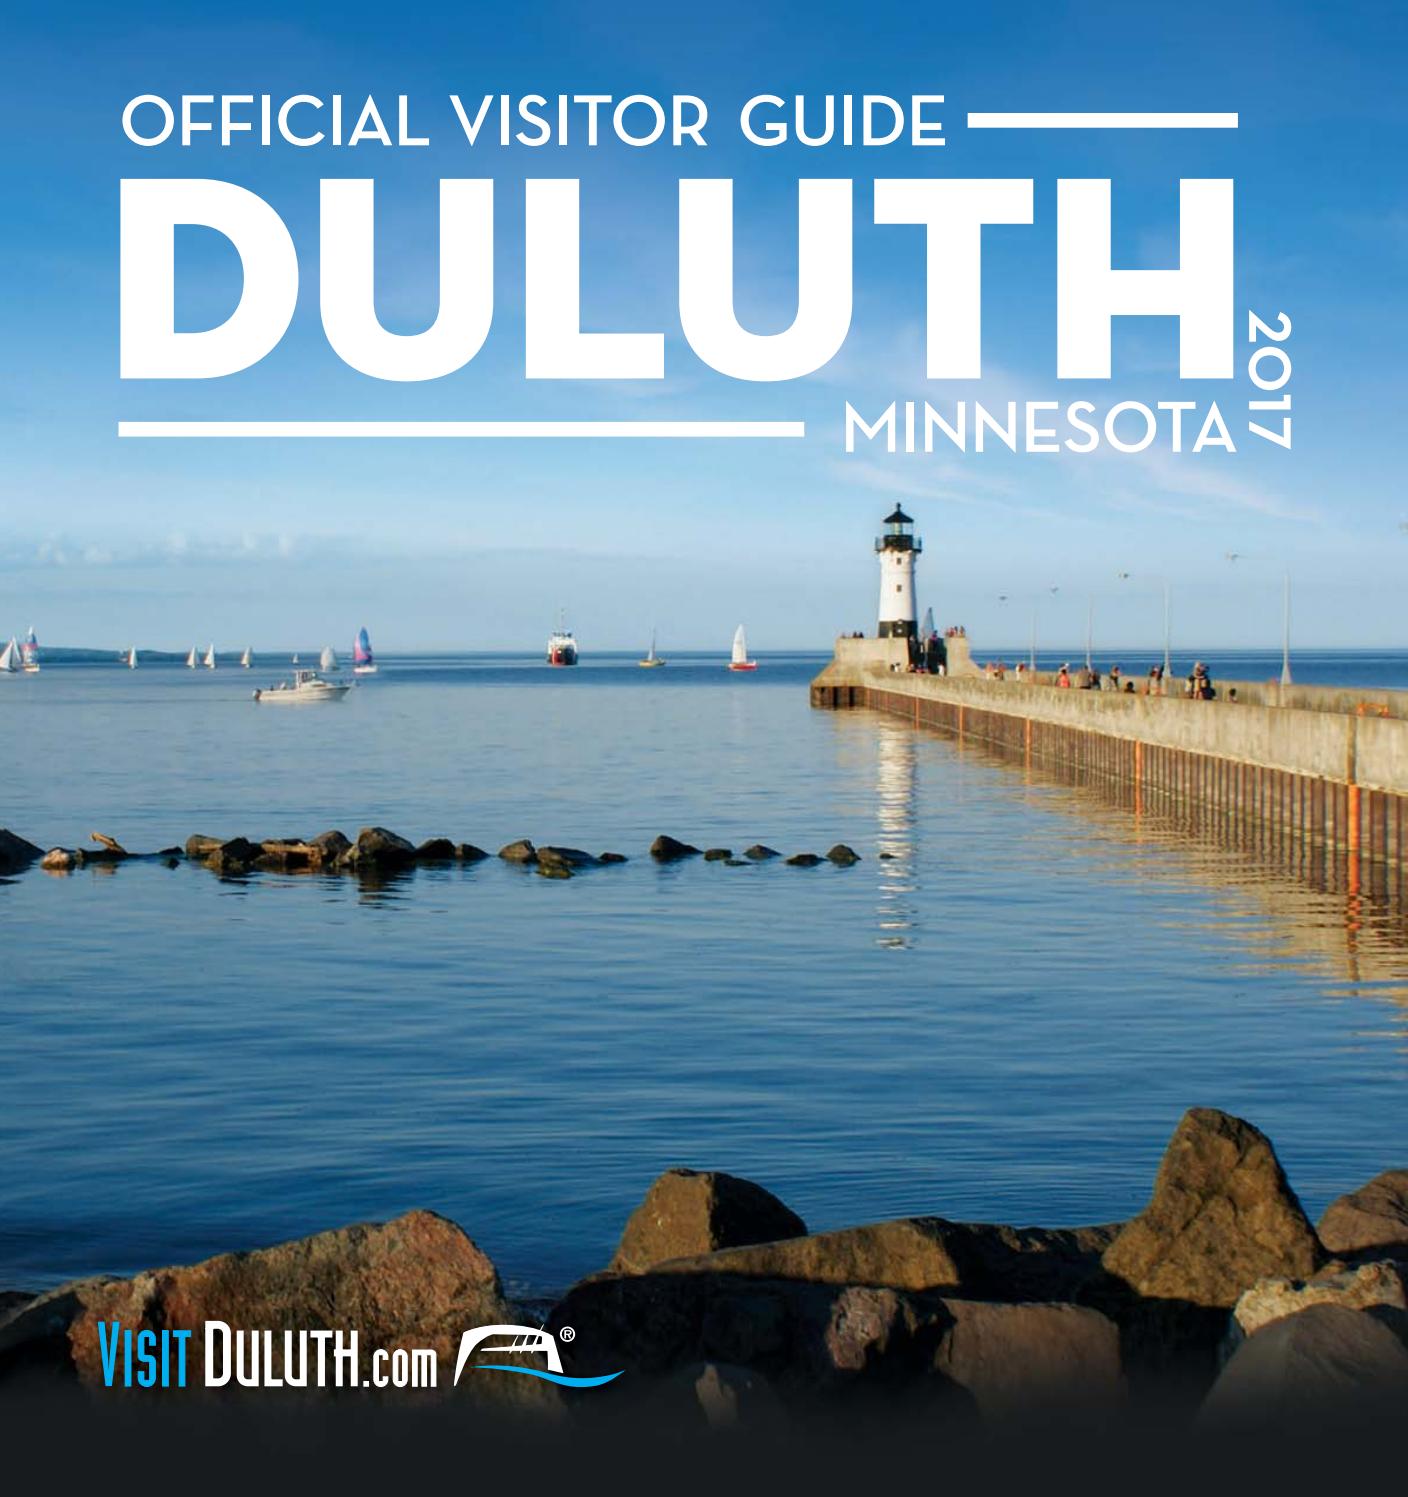 Duluth forge Fireplace Awesome 2017 Duluth Visitor Guide by Next Precision Marketing issuu